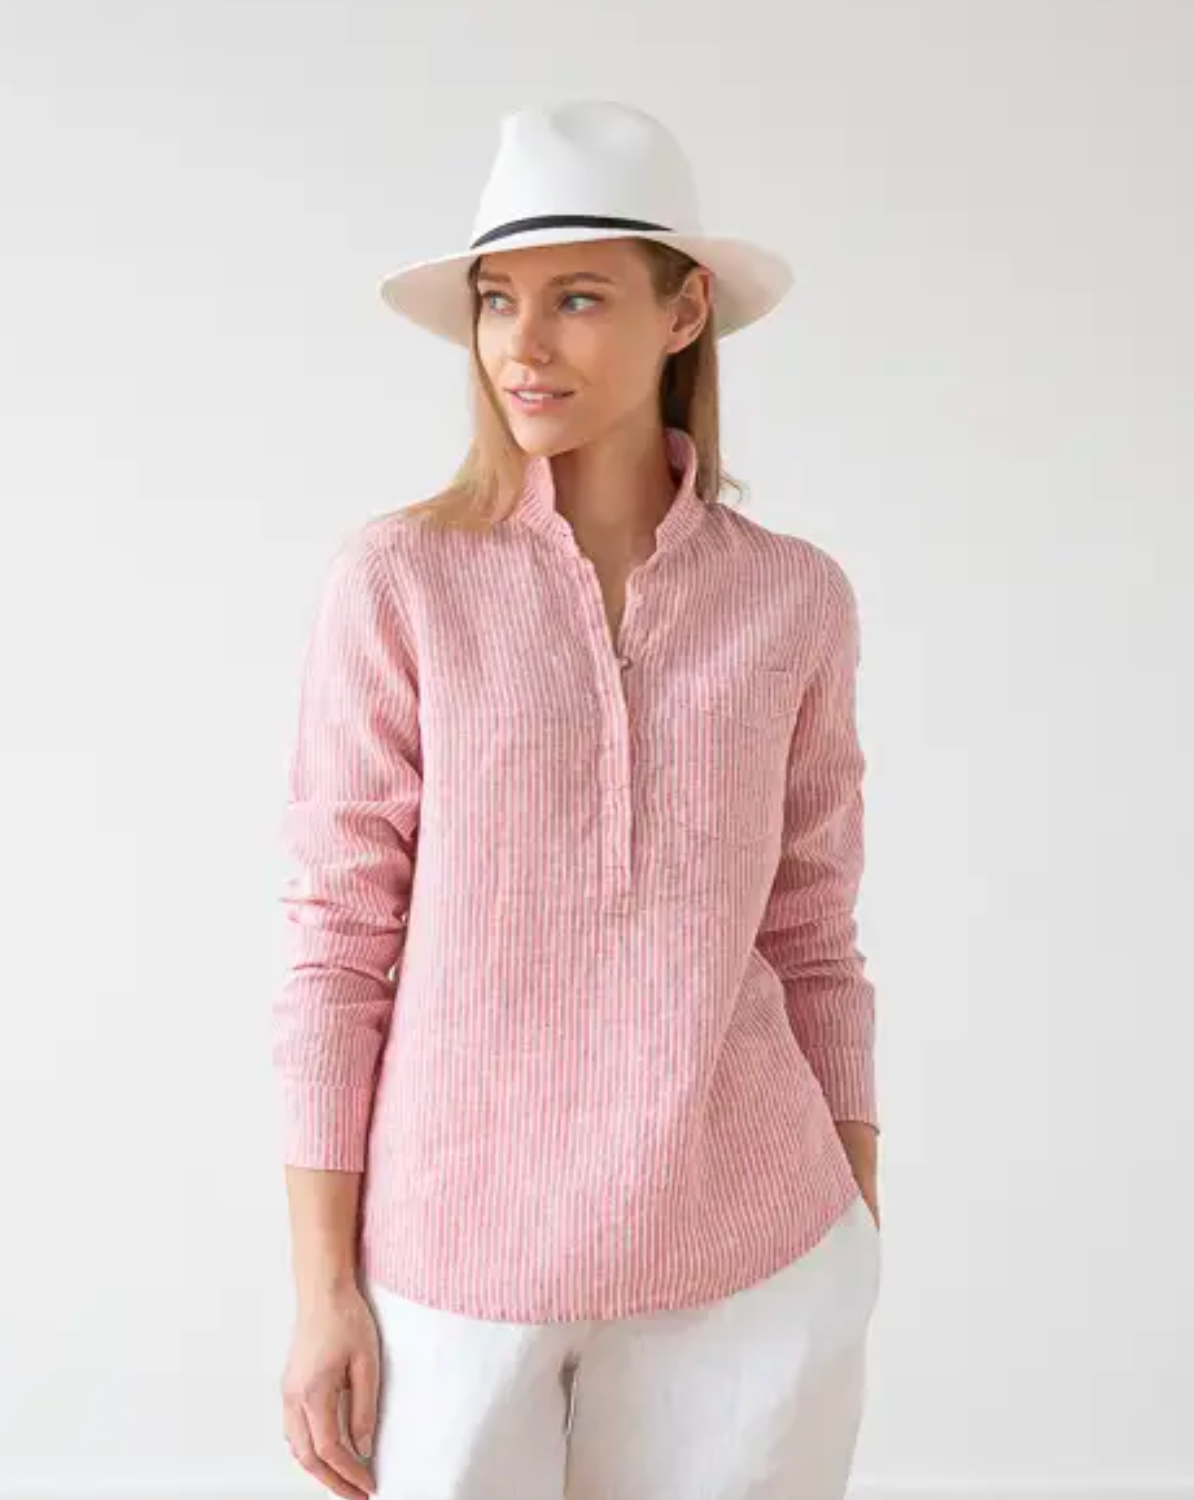 Model wearing LinenMe Stripe Fabio Shirt in Rose stripe wearing white pants and a white hat on a white background